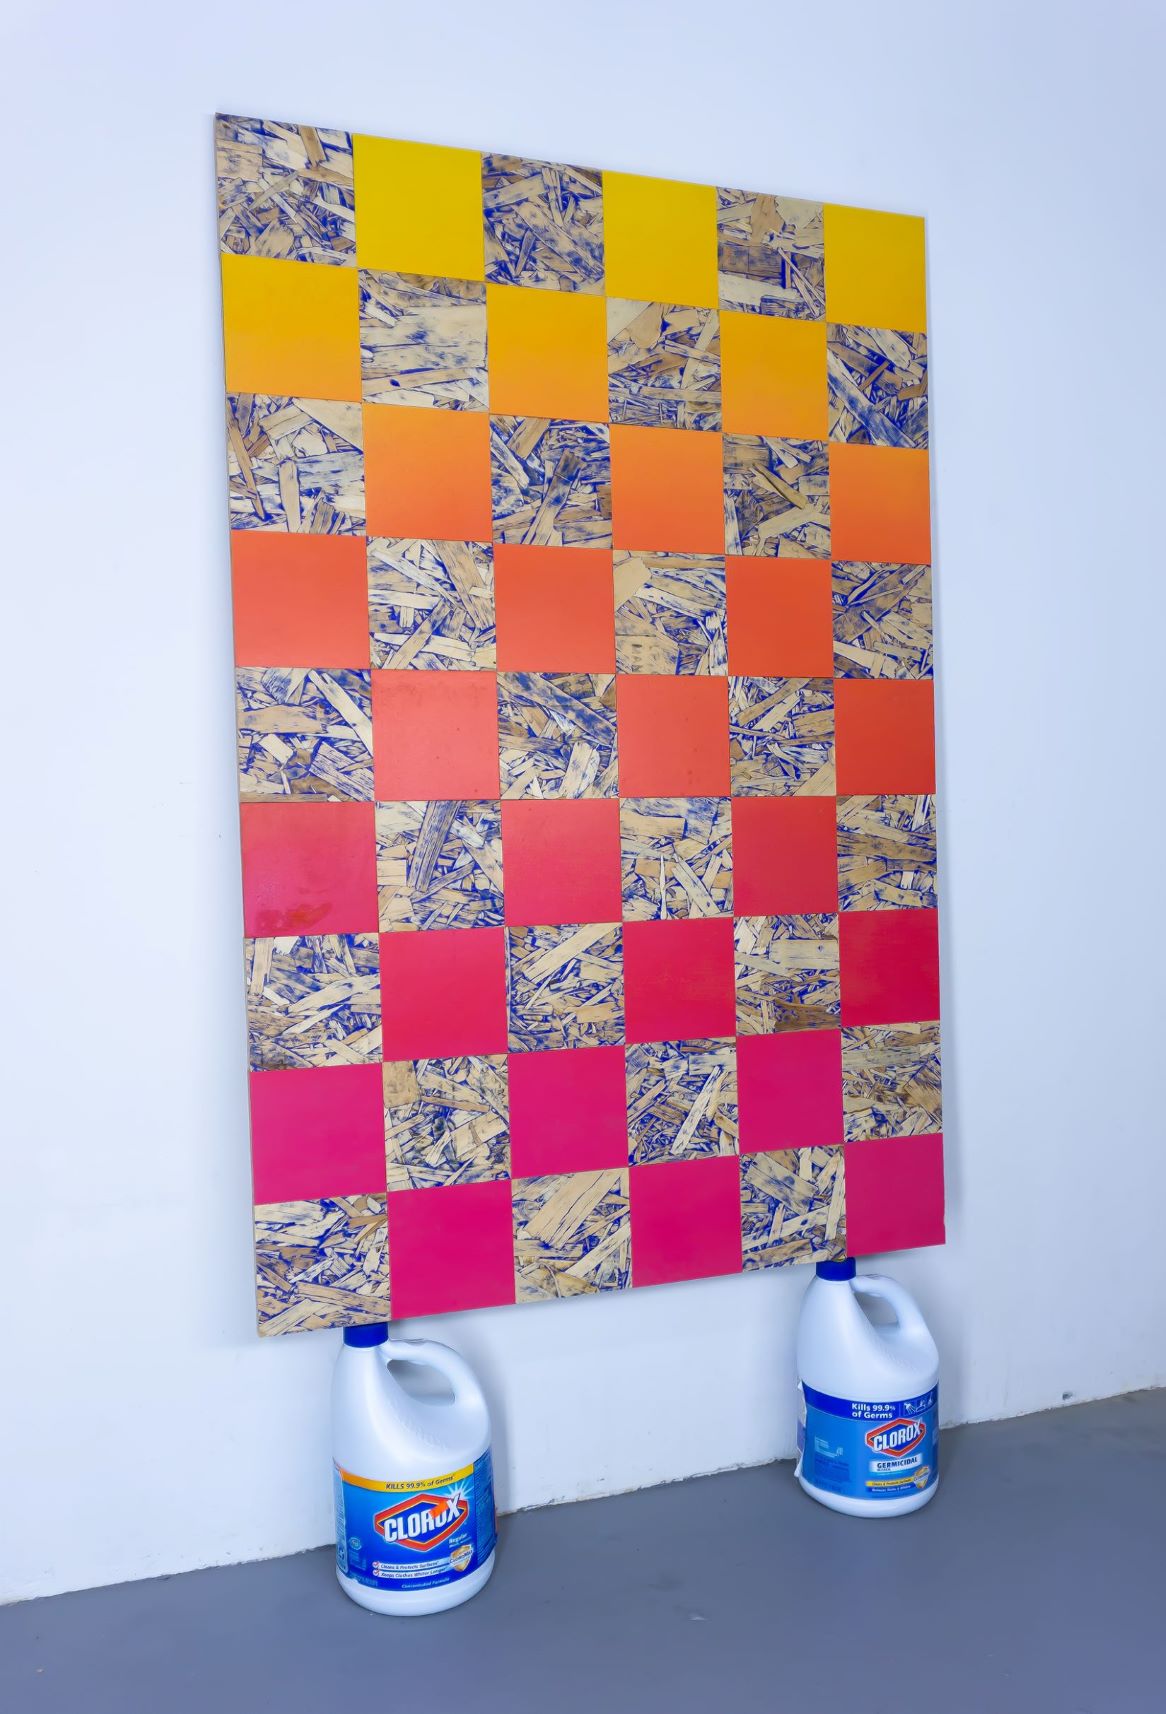 Gradient with Clorox, acrylic on MDF and oriented strand board, Clorox bleach bottles; by Matthew Logsdon